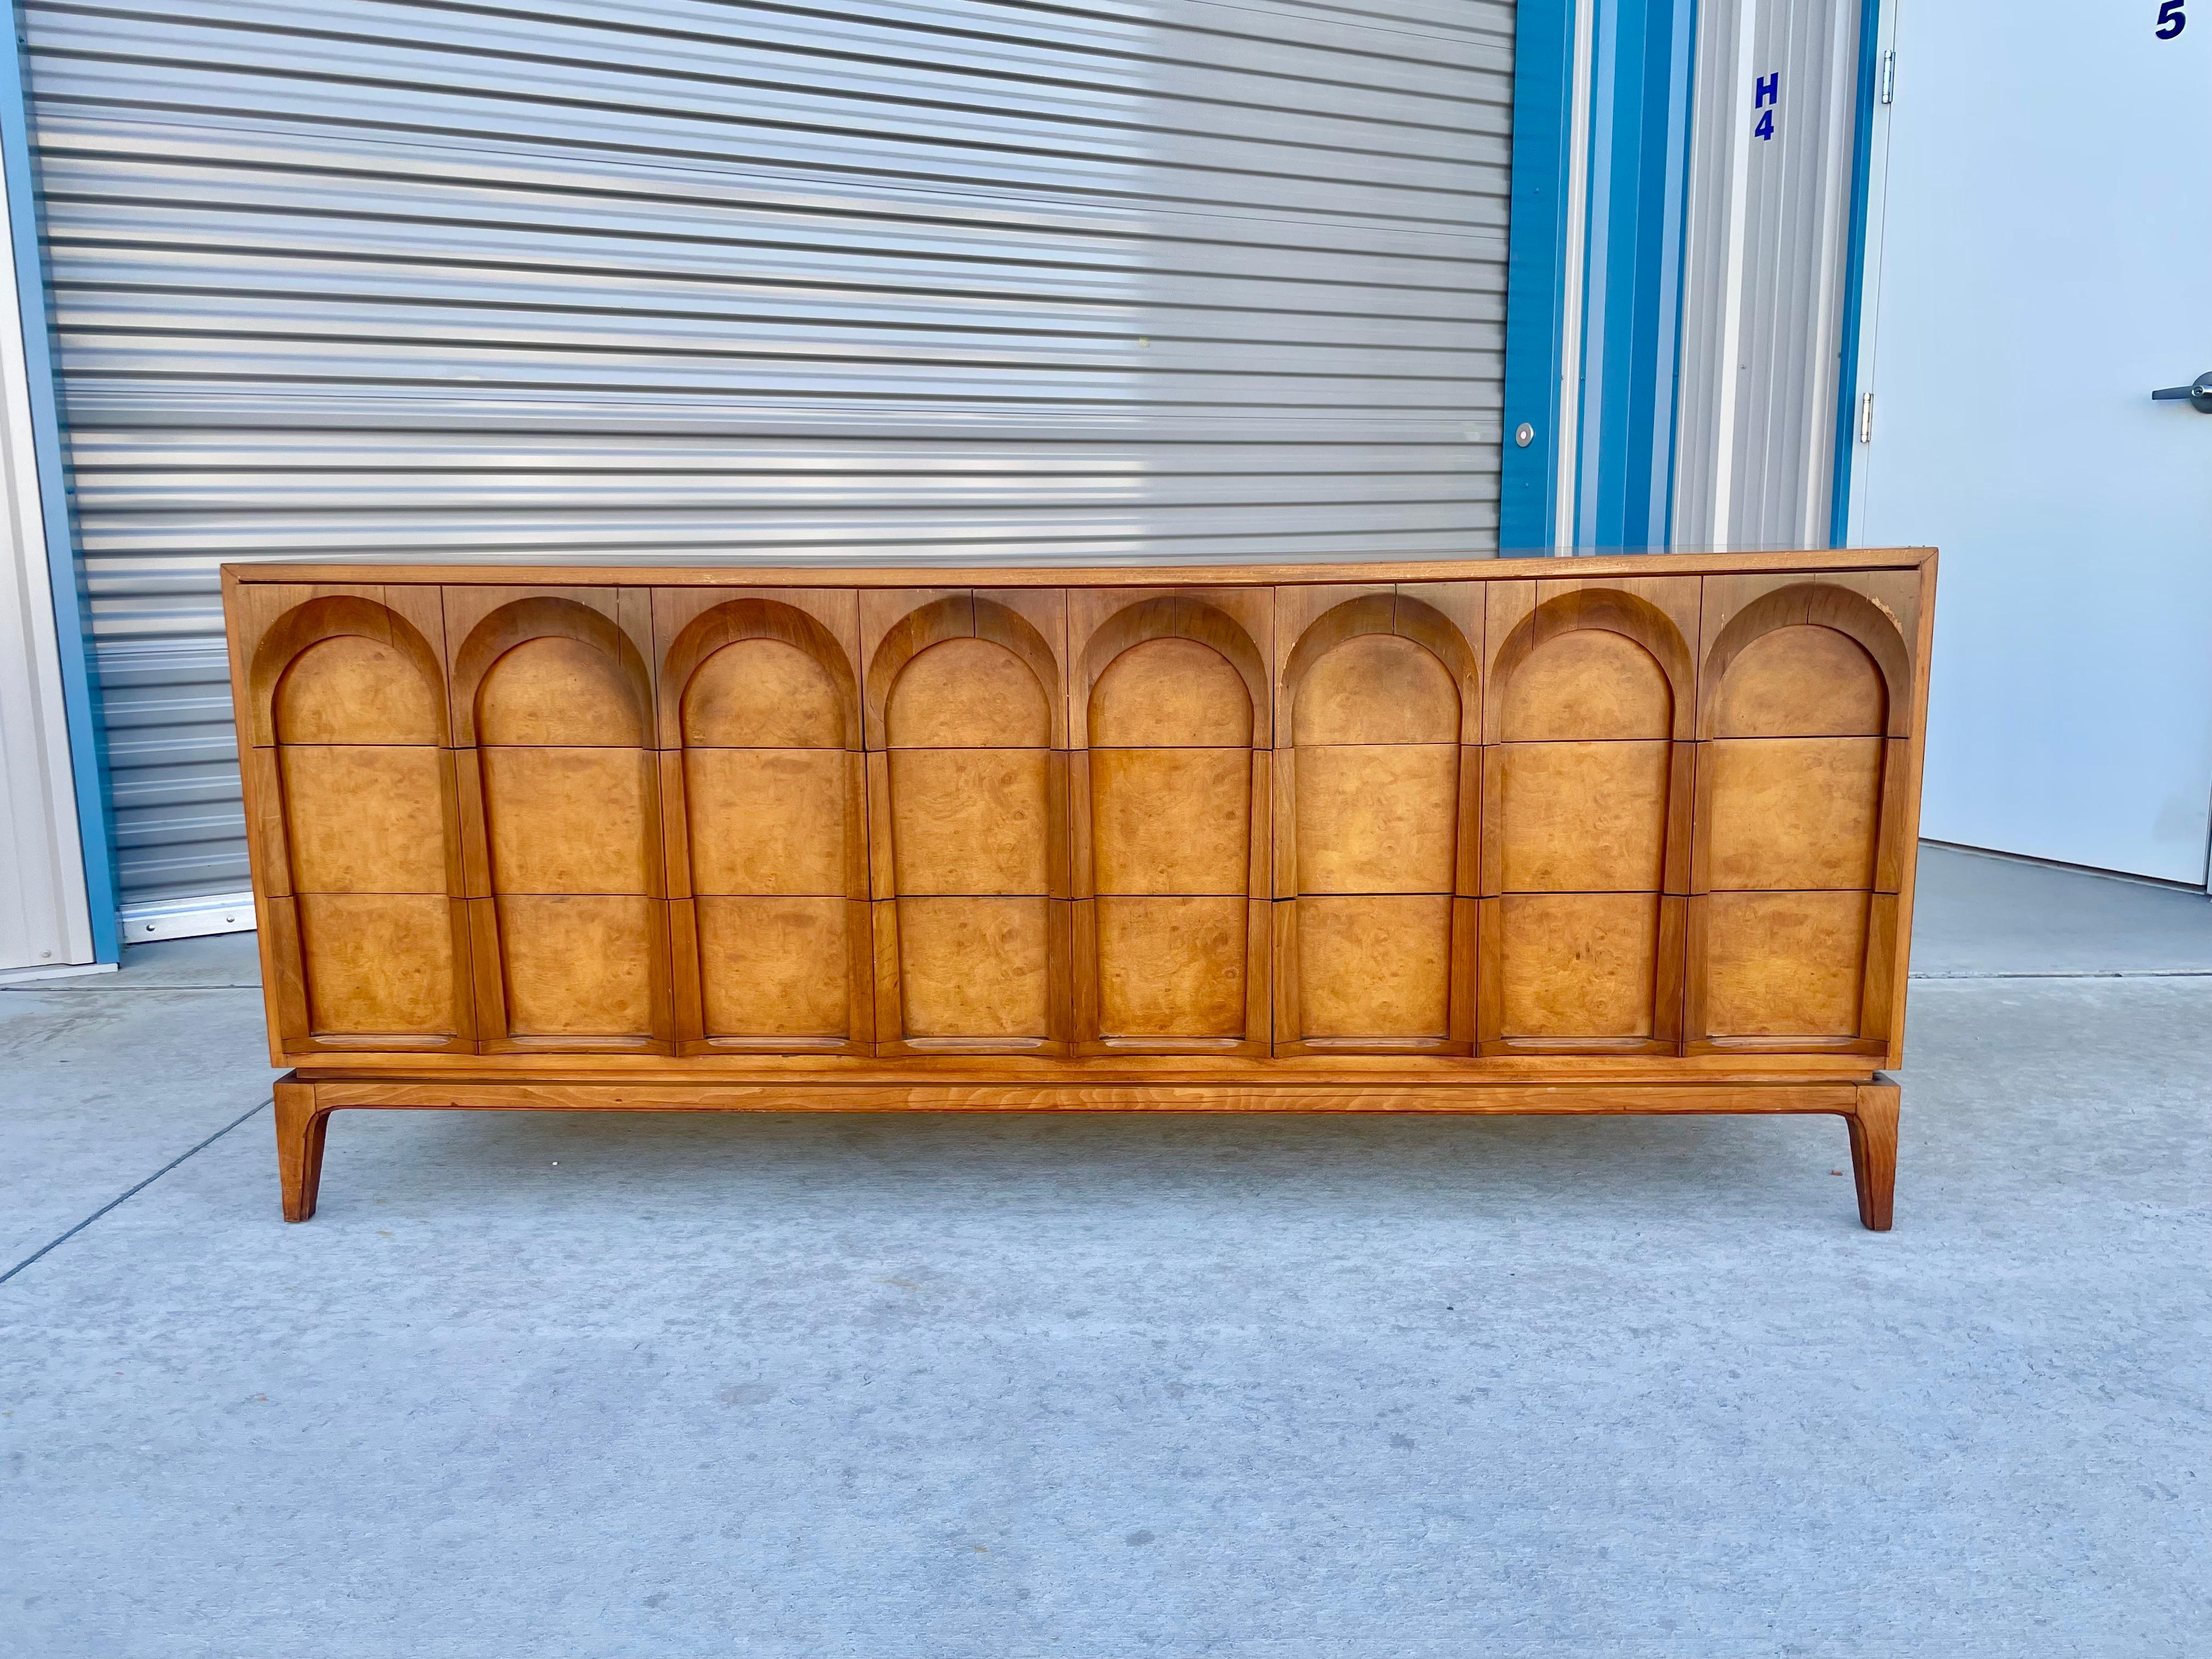 This stunning mid-century dresser was manufactured by Thomasville circa 1960s. This stunning piece features gorgeous walnut grain with burlwood inserts and sculpted cathedral arches, making it unique. The dresser also features nine pull-out drawers